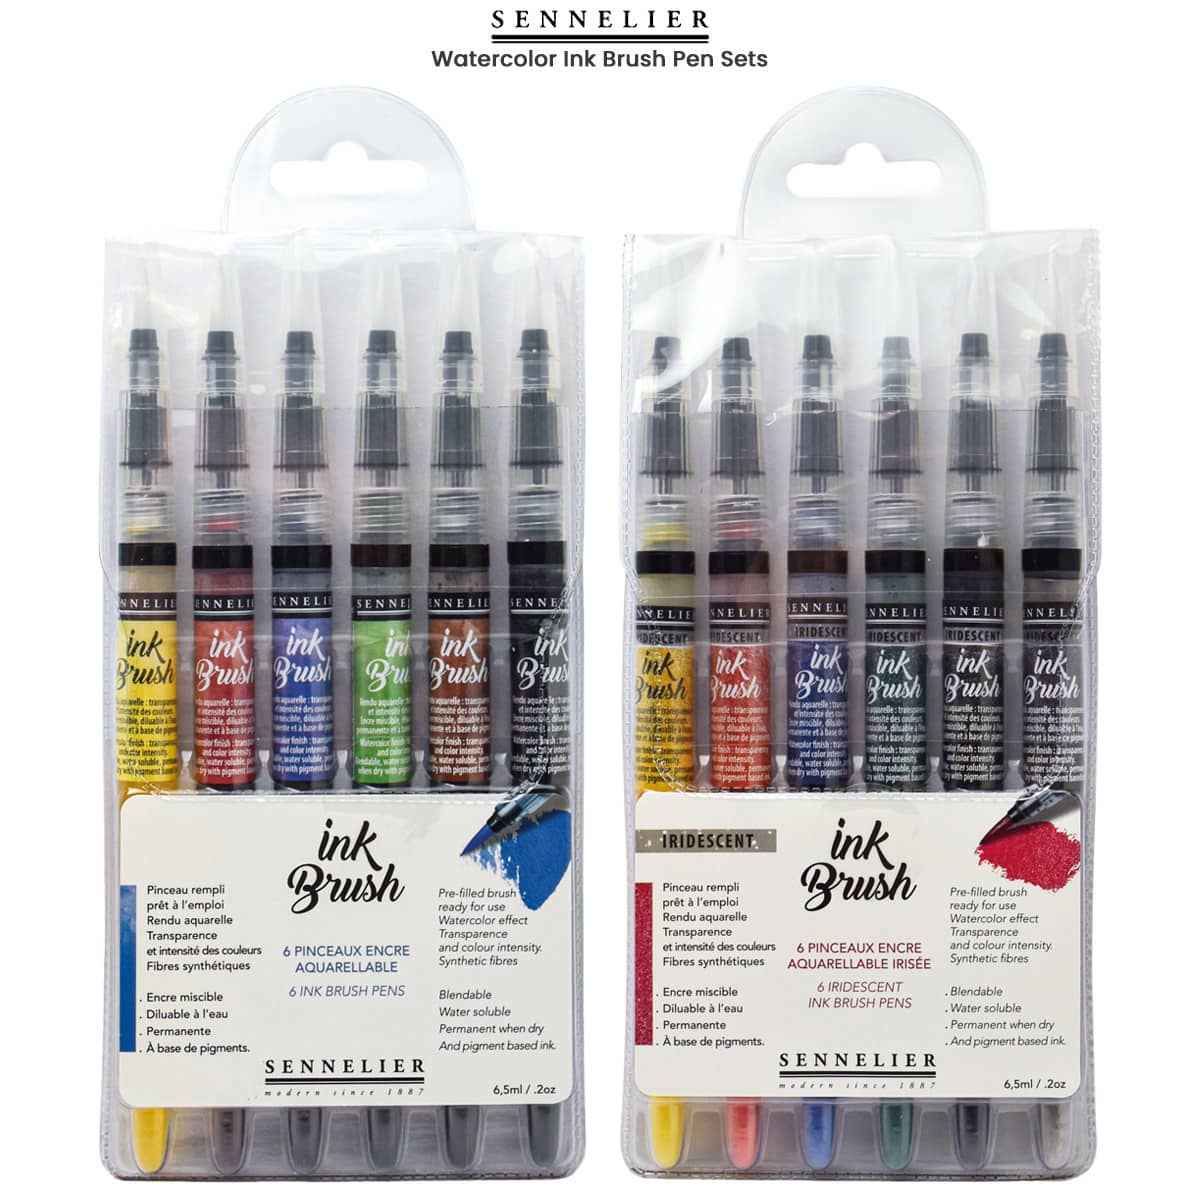 Best Choice Products Set of 228 Alcohol-Based Markers, Dual-Tipped Pens w/ Brush & Chisel Tip, Carrying Case - Natural